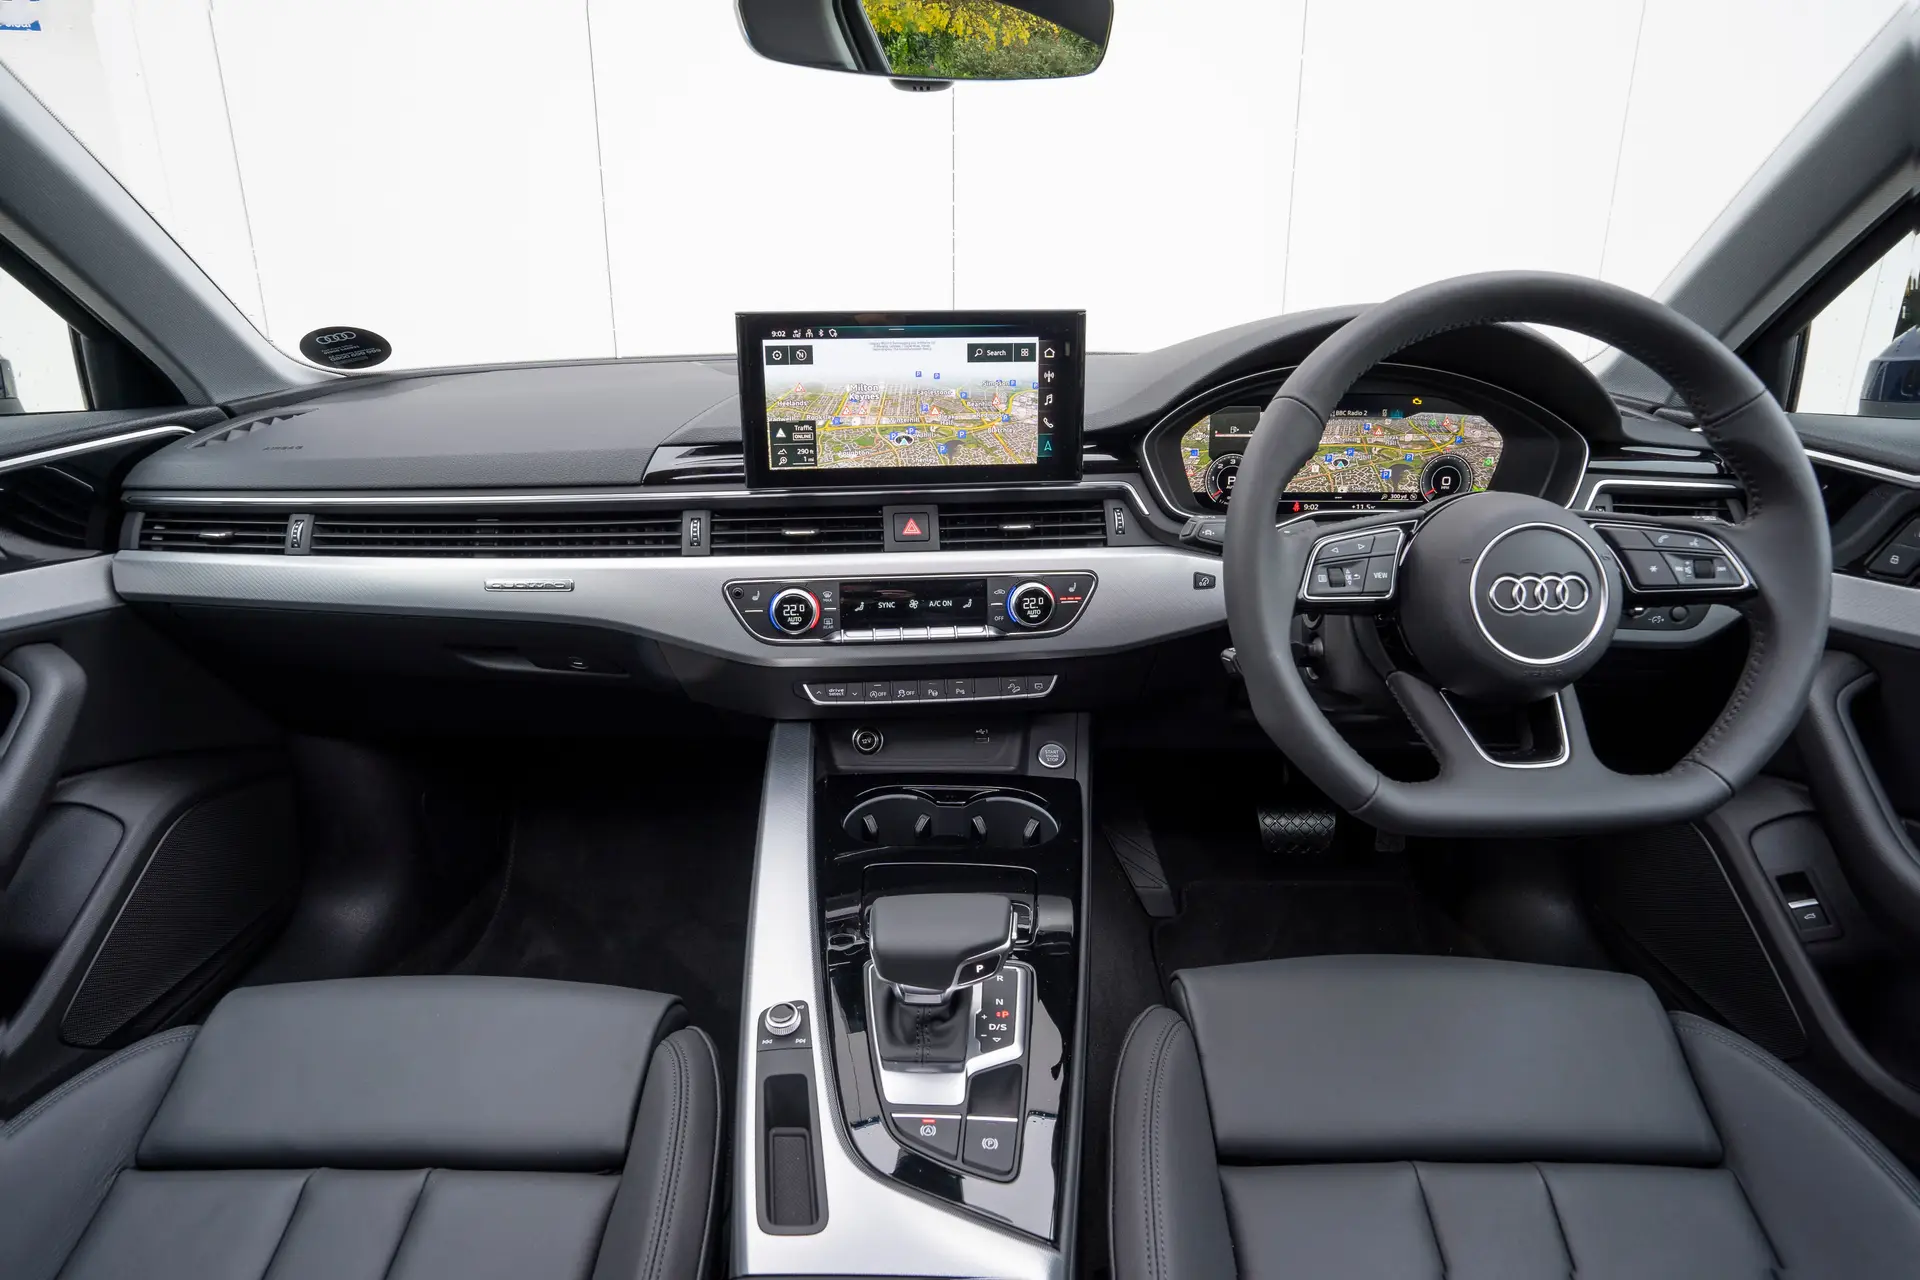 Audi A4 Allroad Review 2023: interior close up photo of the Audi A4 Allroad dashboard